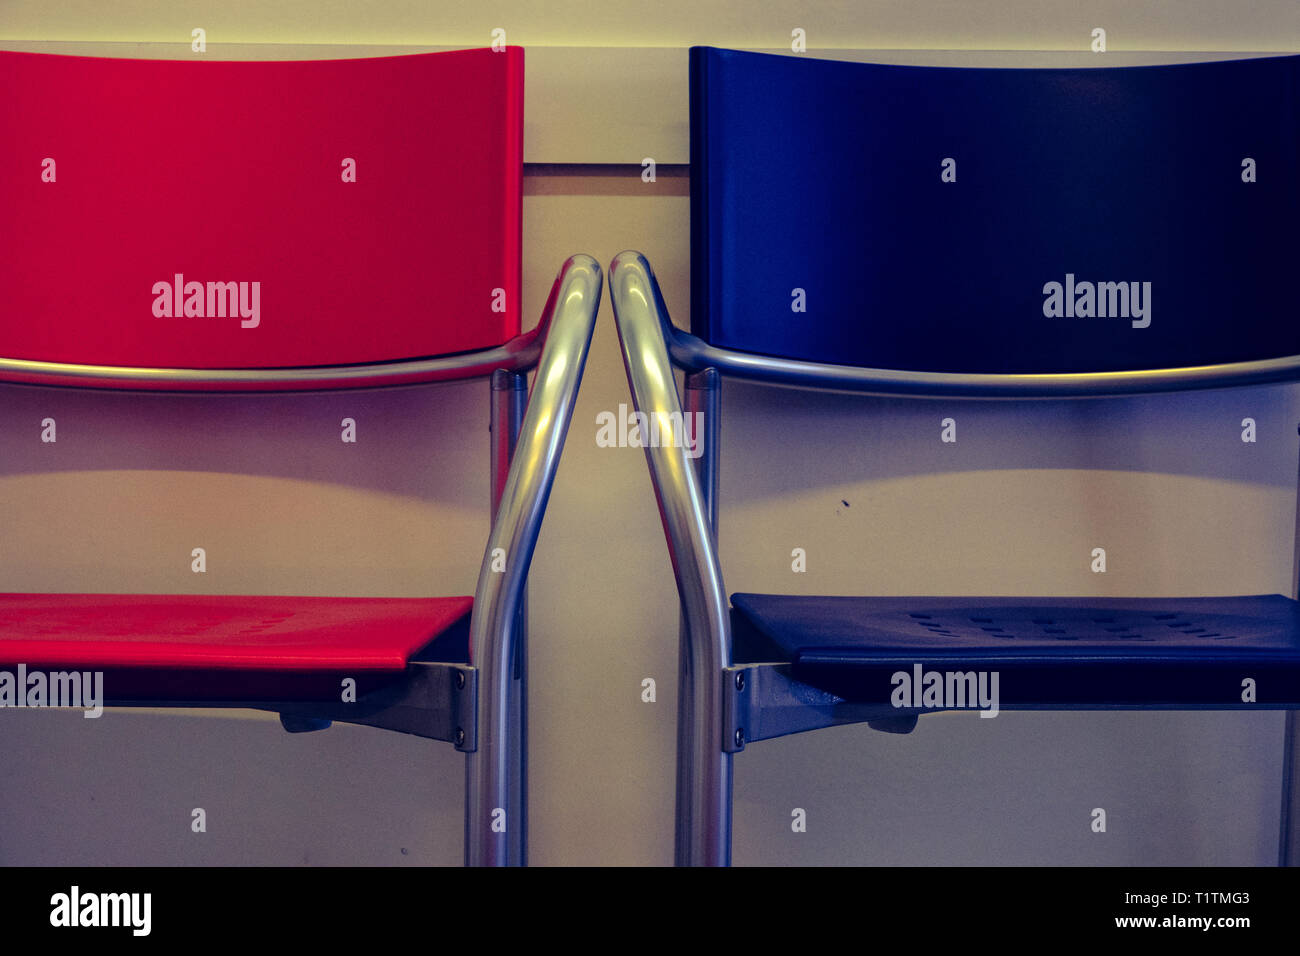 Red chair and blue chair Stock Photo